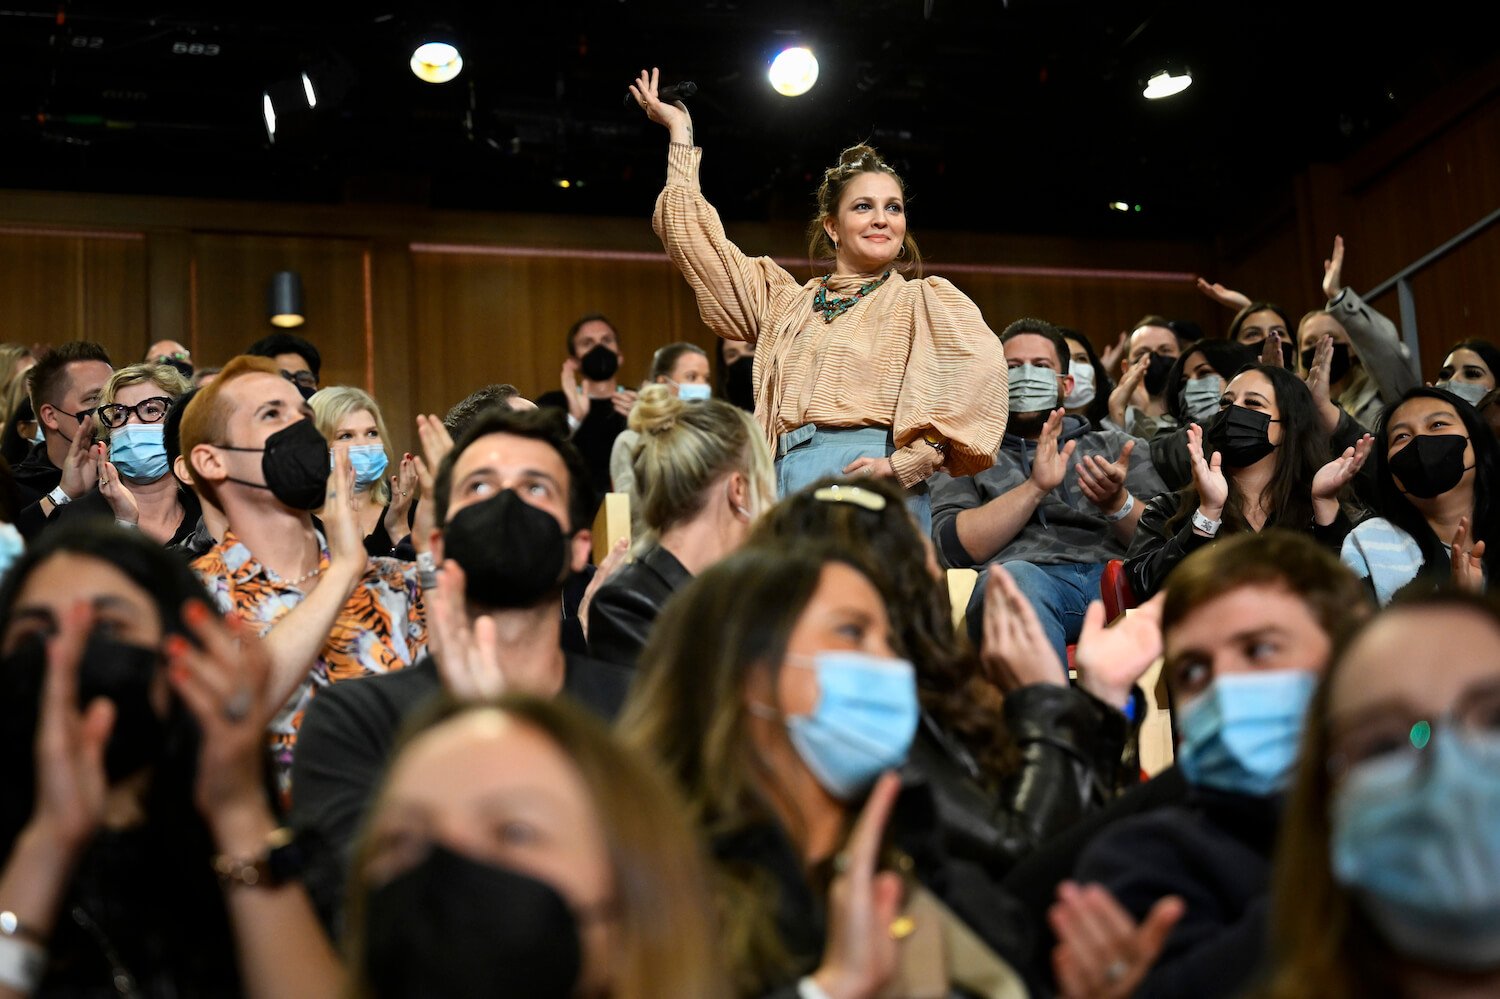 'The Drew Barrymore Show' star Drew Barrymore in a crowd of masked people with her hand up